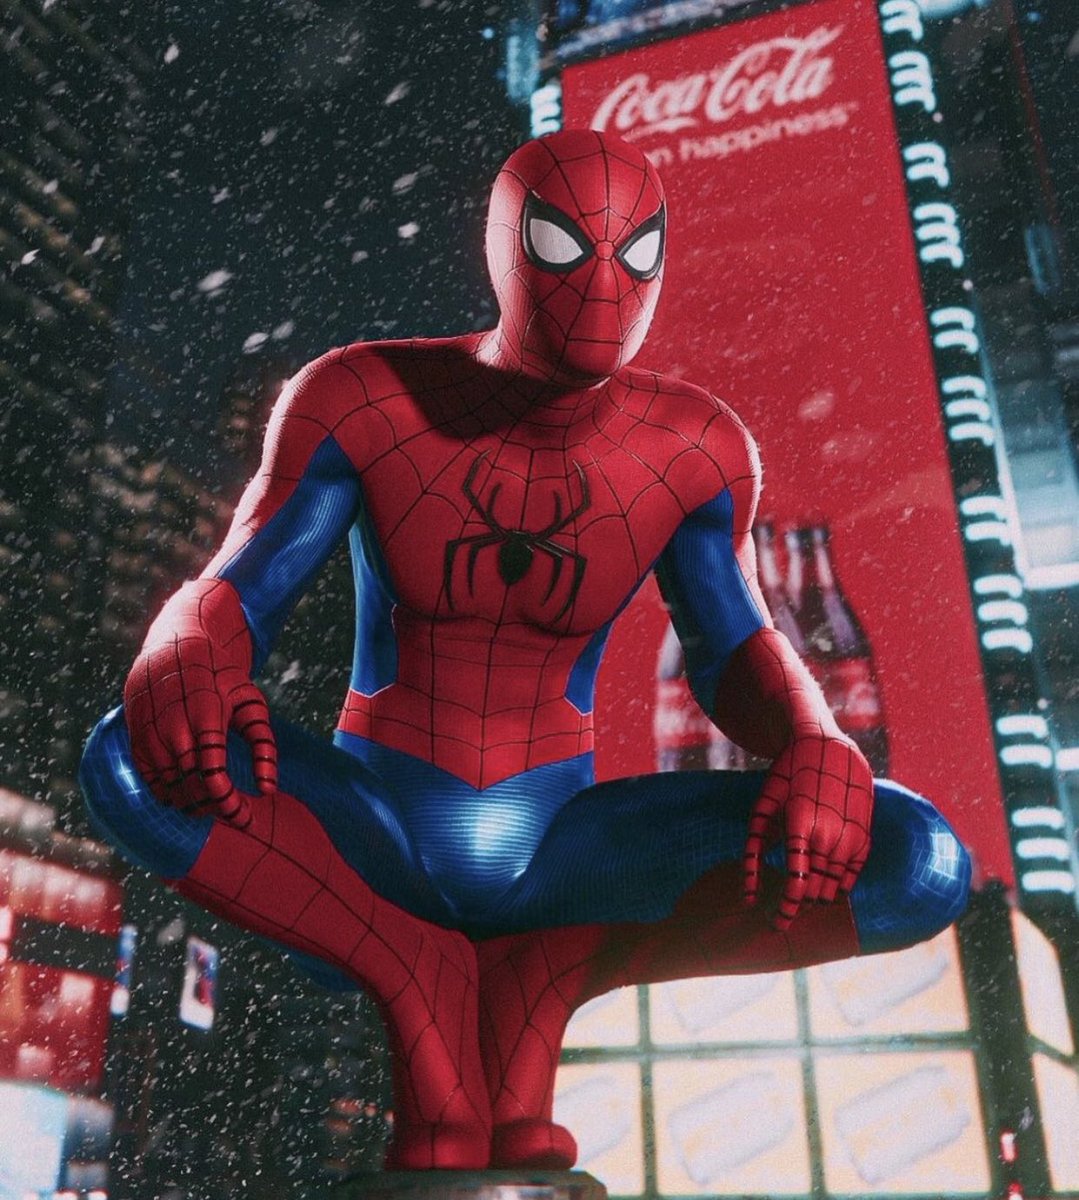 RT @KeiziTV: If the new MCU Spider-Man suit looks even half as good as this then it’s EASILY the best Spidey suit https://t.co/TrNgQCvnBB